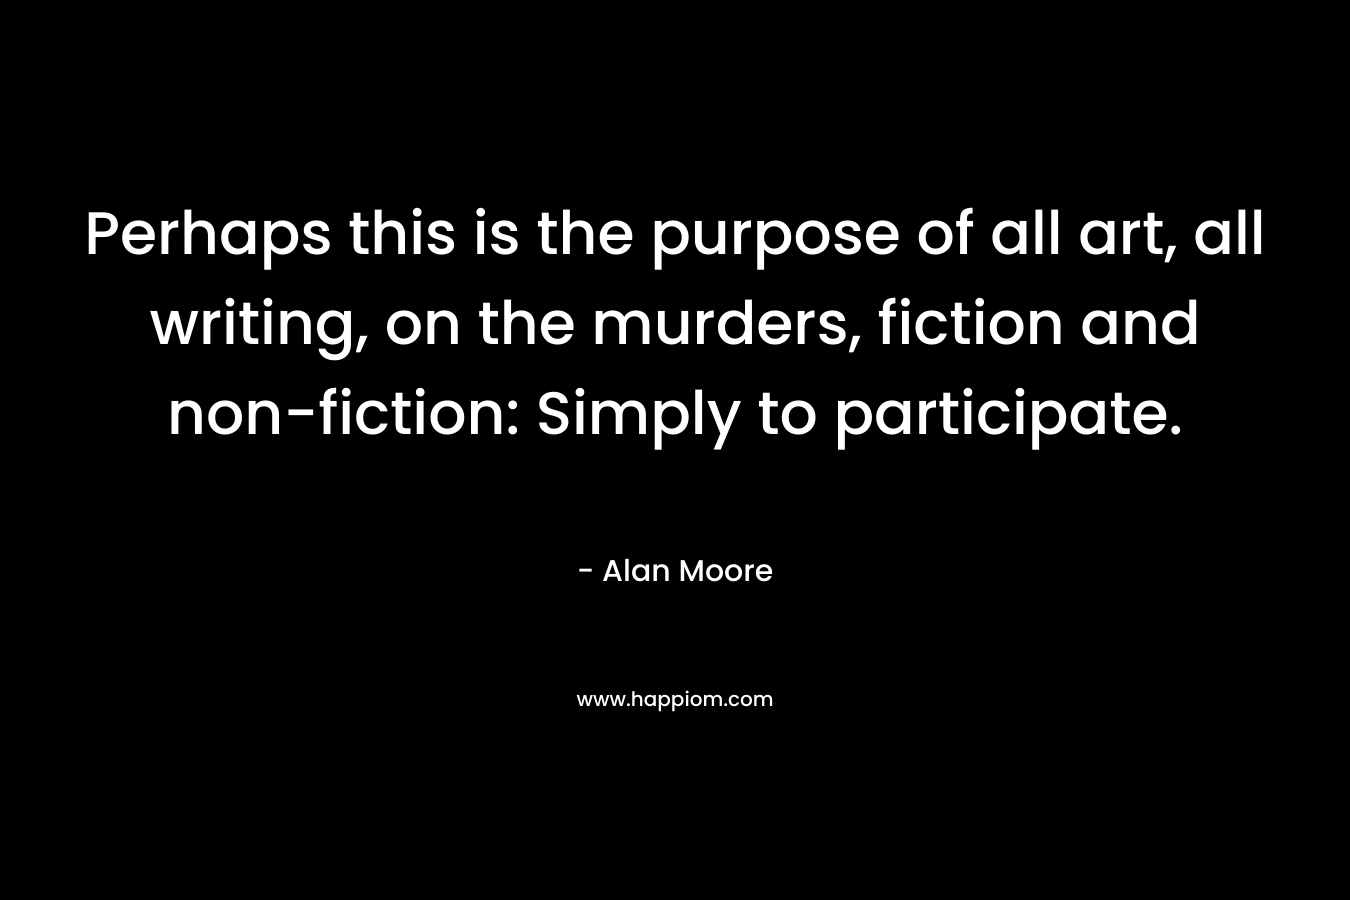 Perhaps this is the purpose of all art, all writing, on the murders, fiction and non-fiction: Simply to participate.